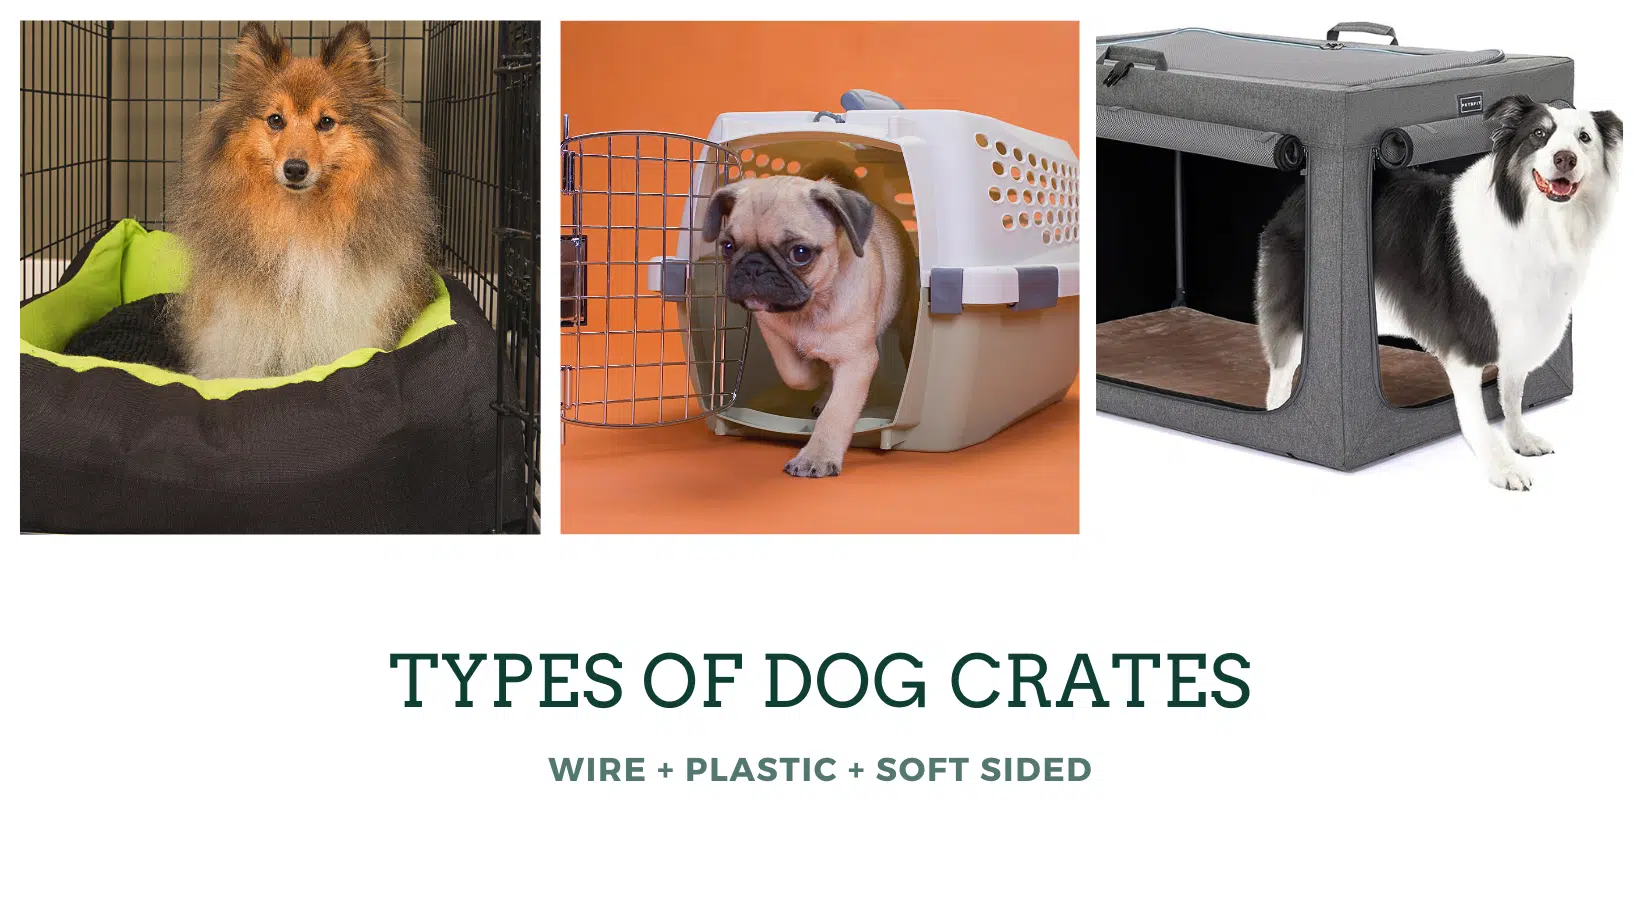 Types of Dog Crates, Wire, Plastic, and Soft sided showing a border collie and a pug